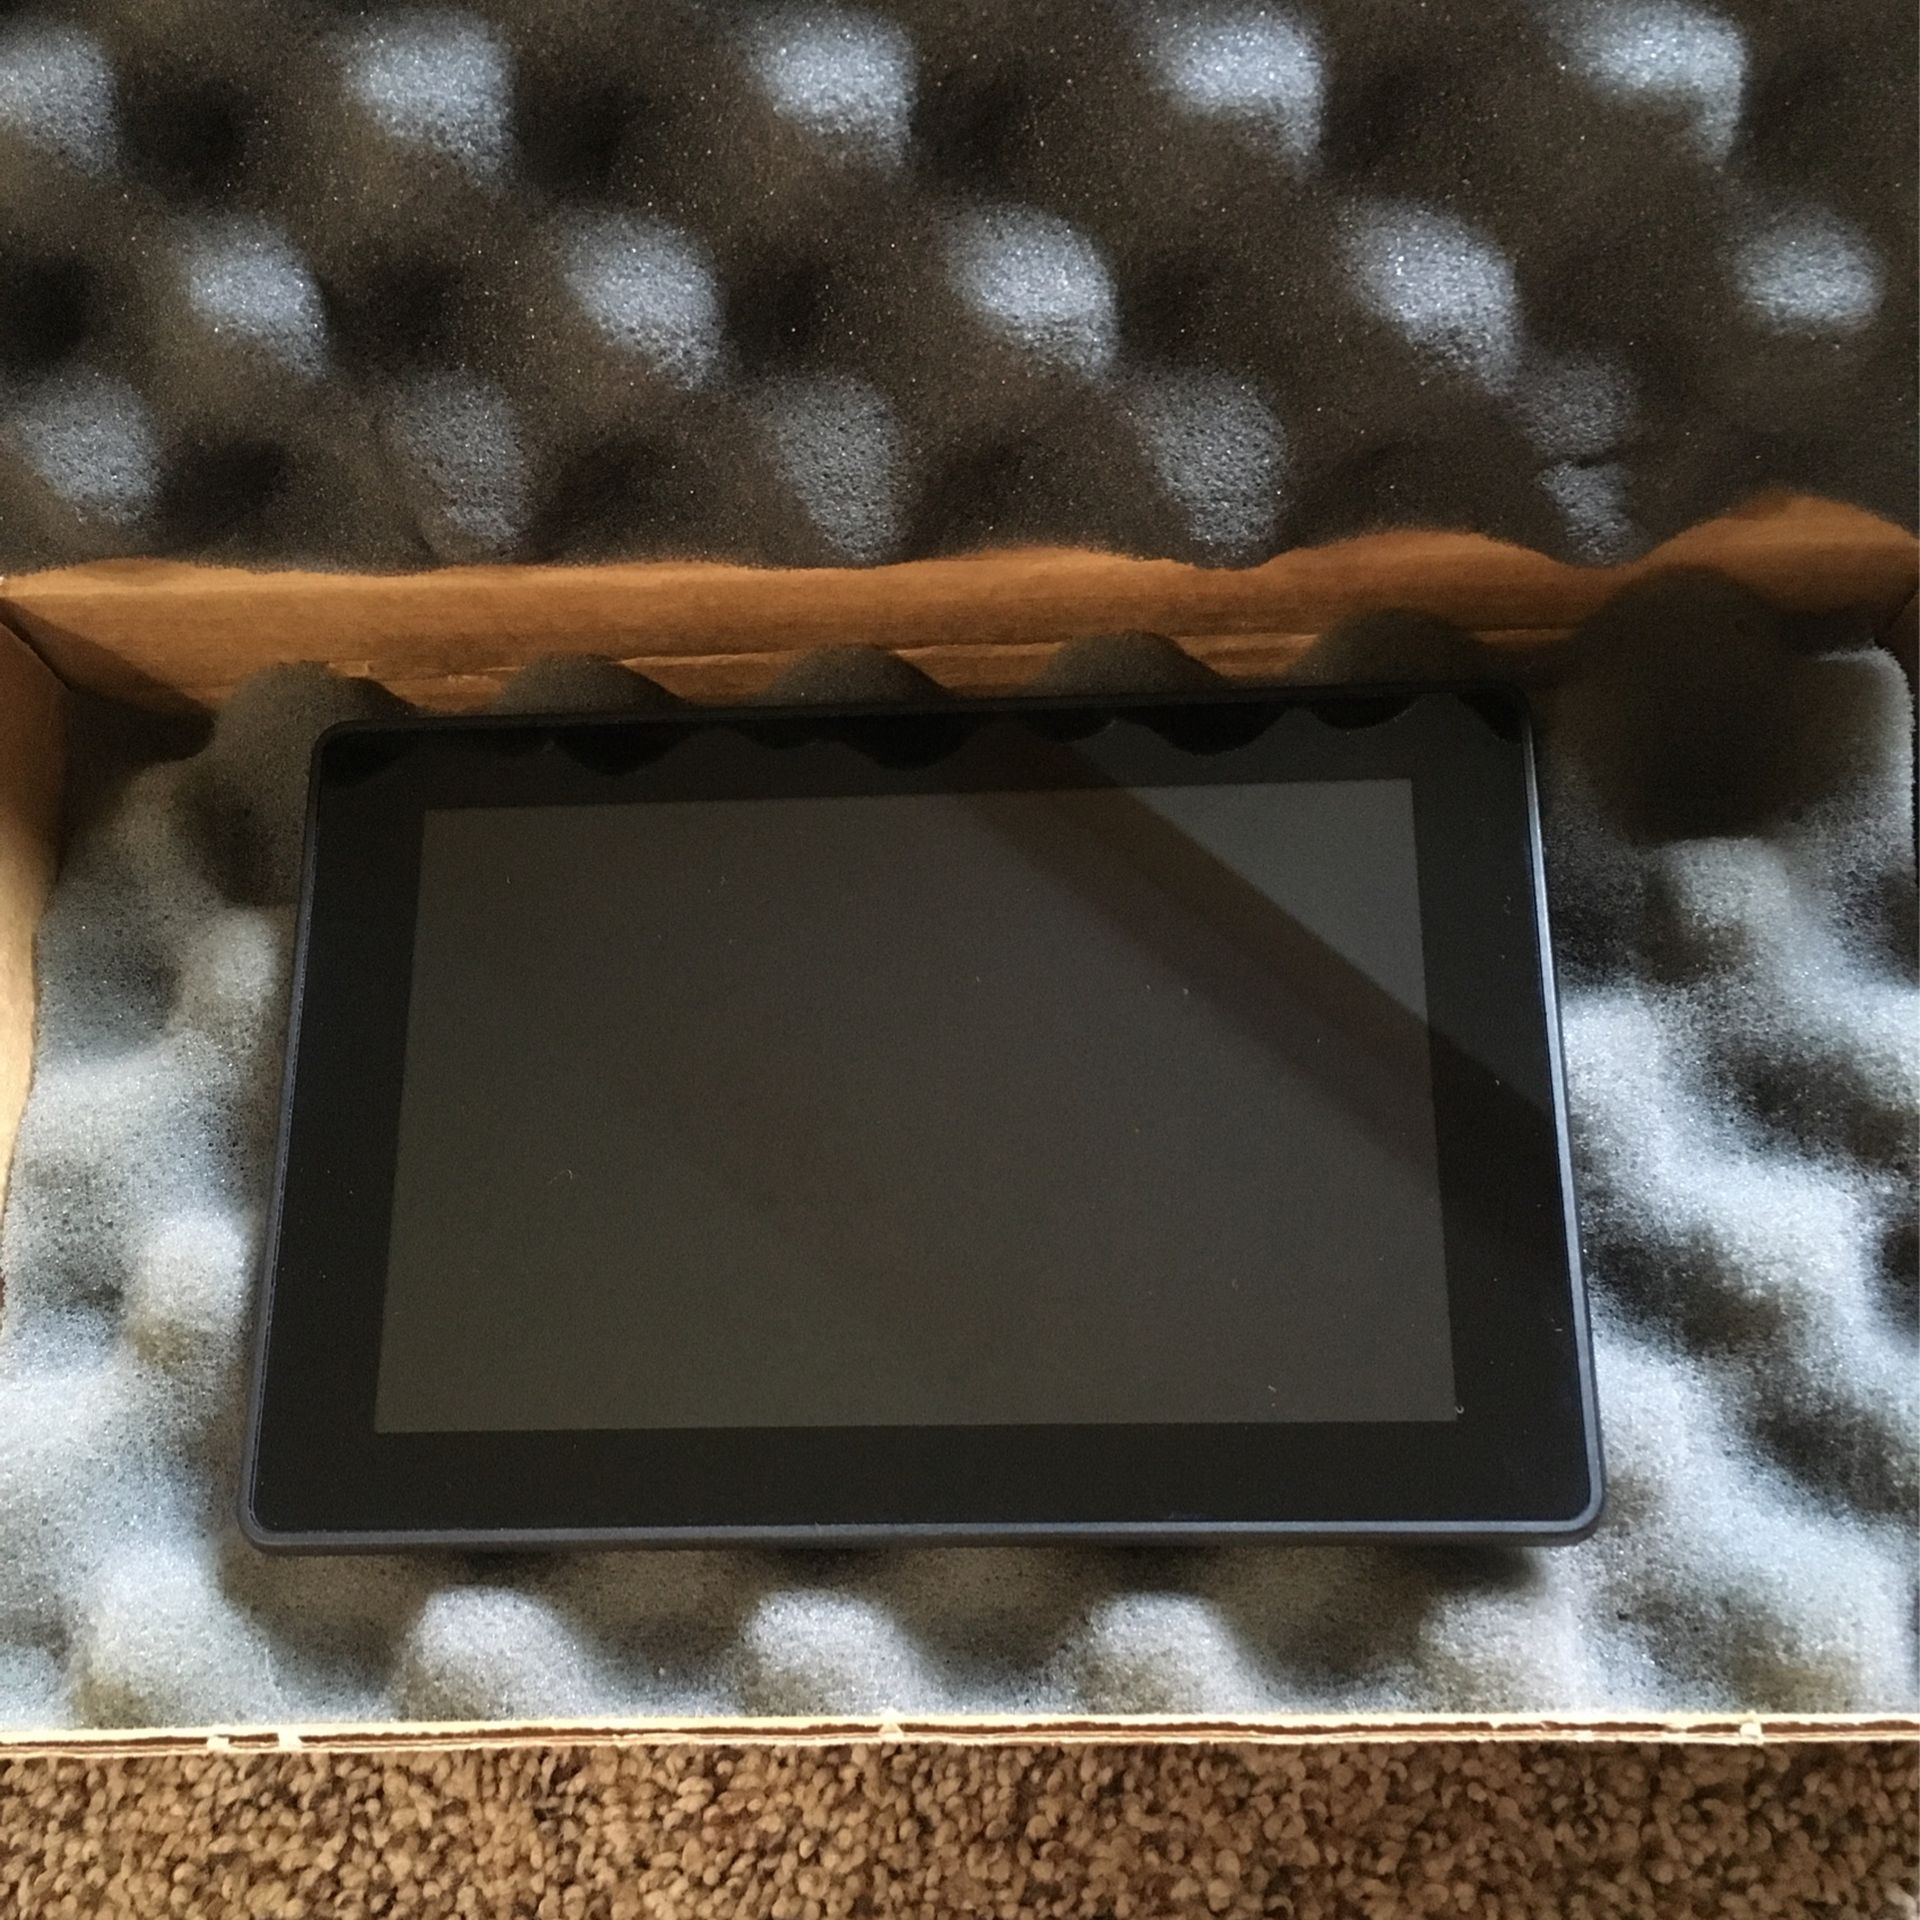 Amazon Kindle Fire HD Tablet With Otter Box And Charging Cable